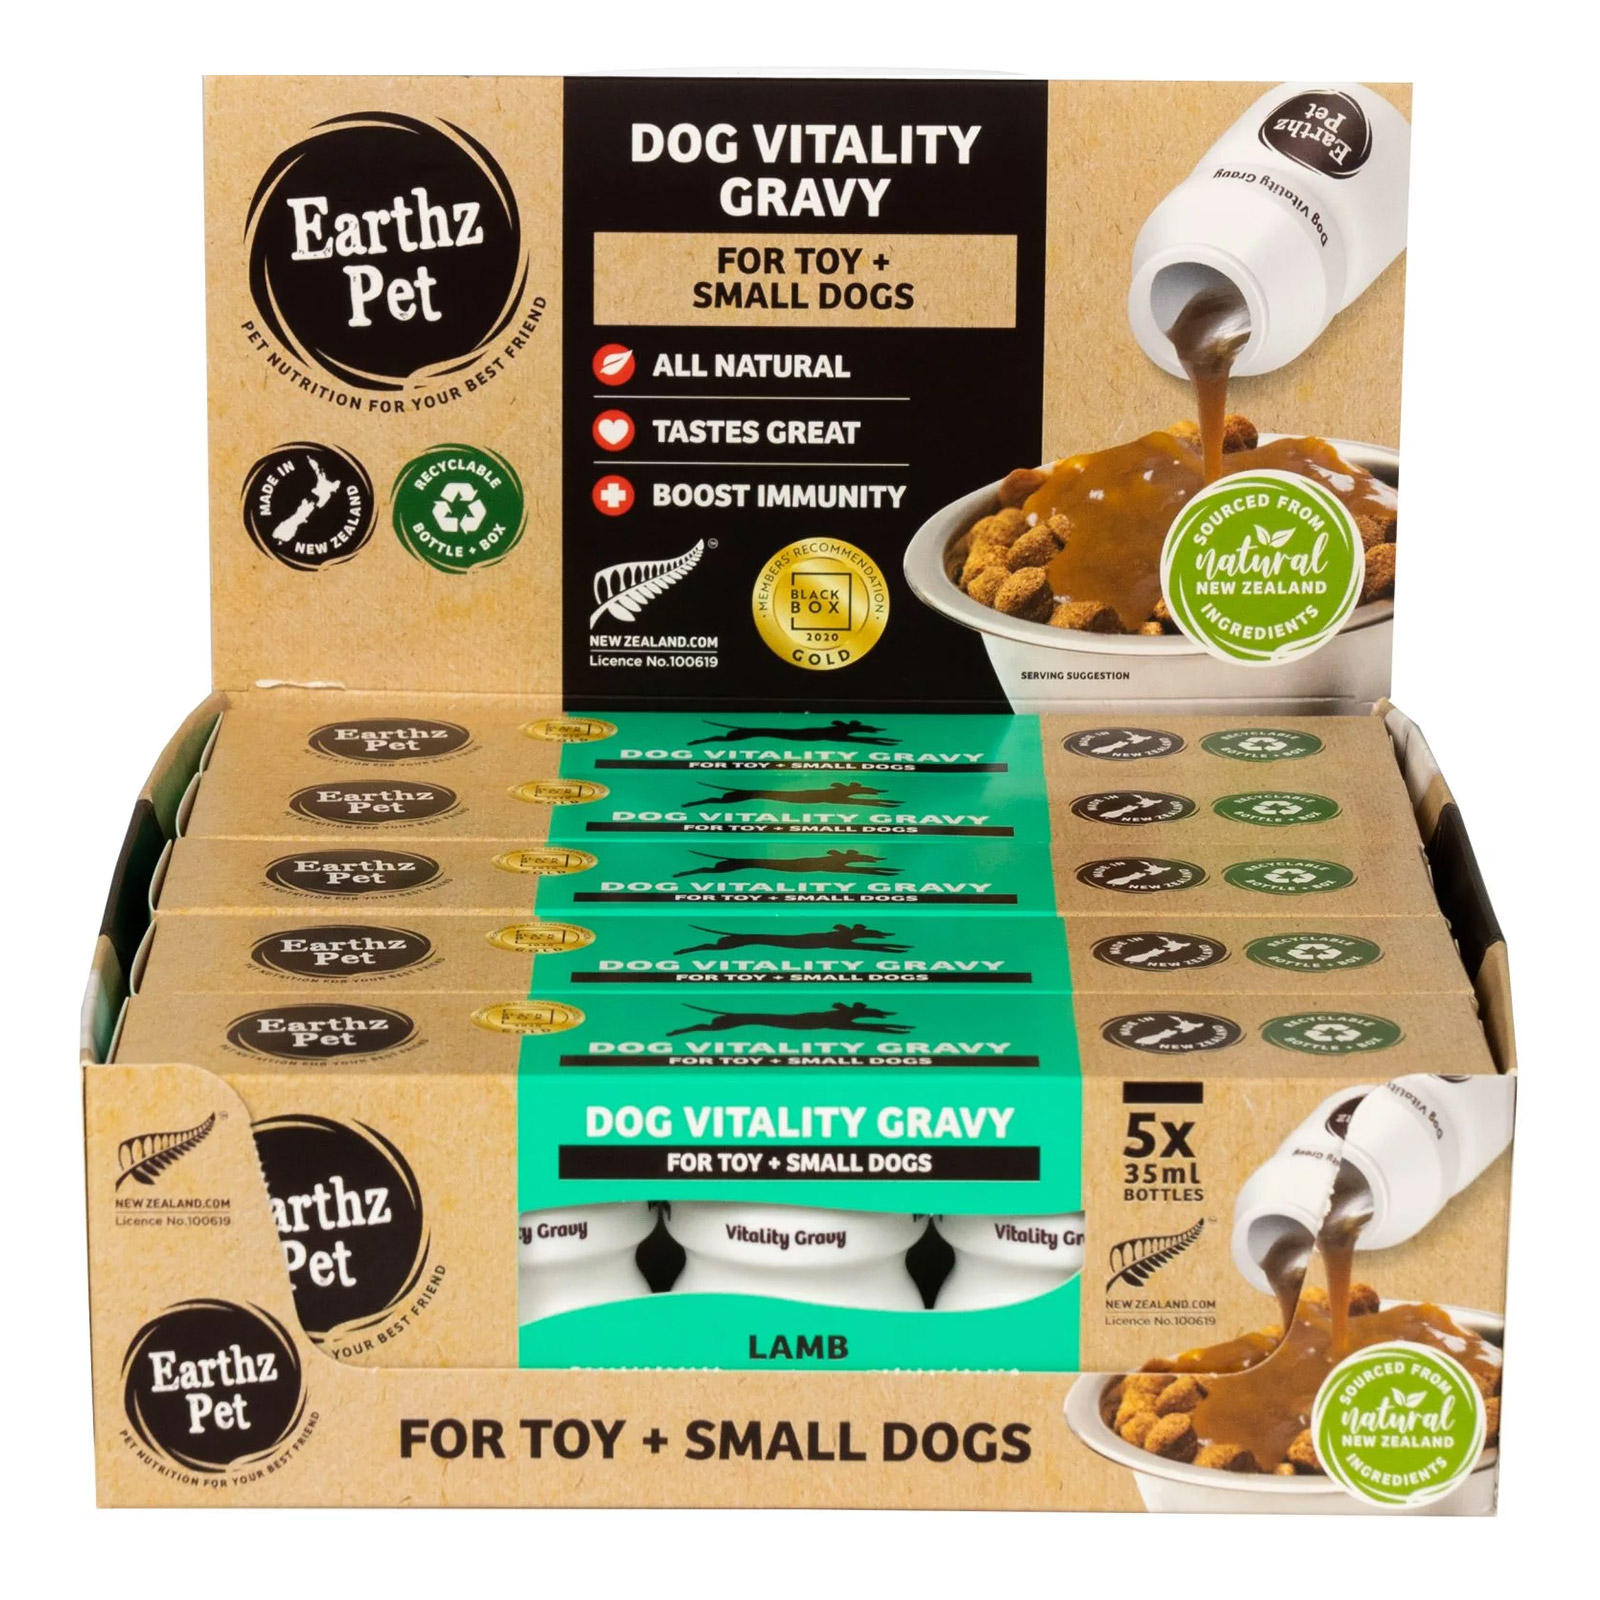 Earthz Pet Free Range Lamb Vitality Gravy For Toy And Small Dogs for Food